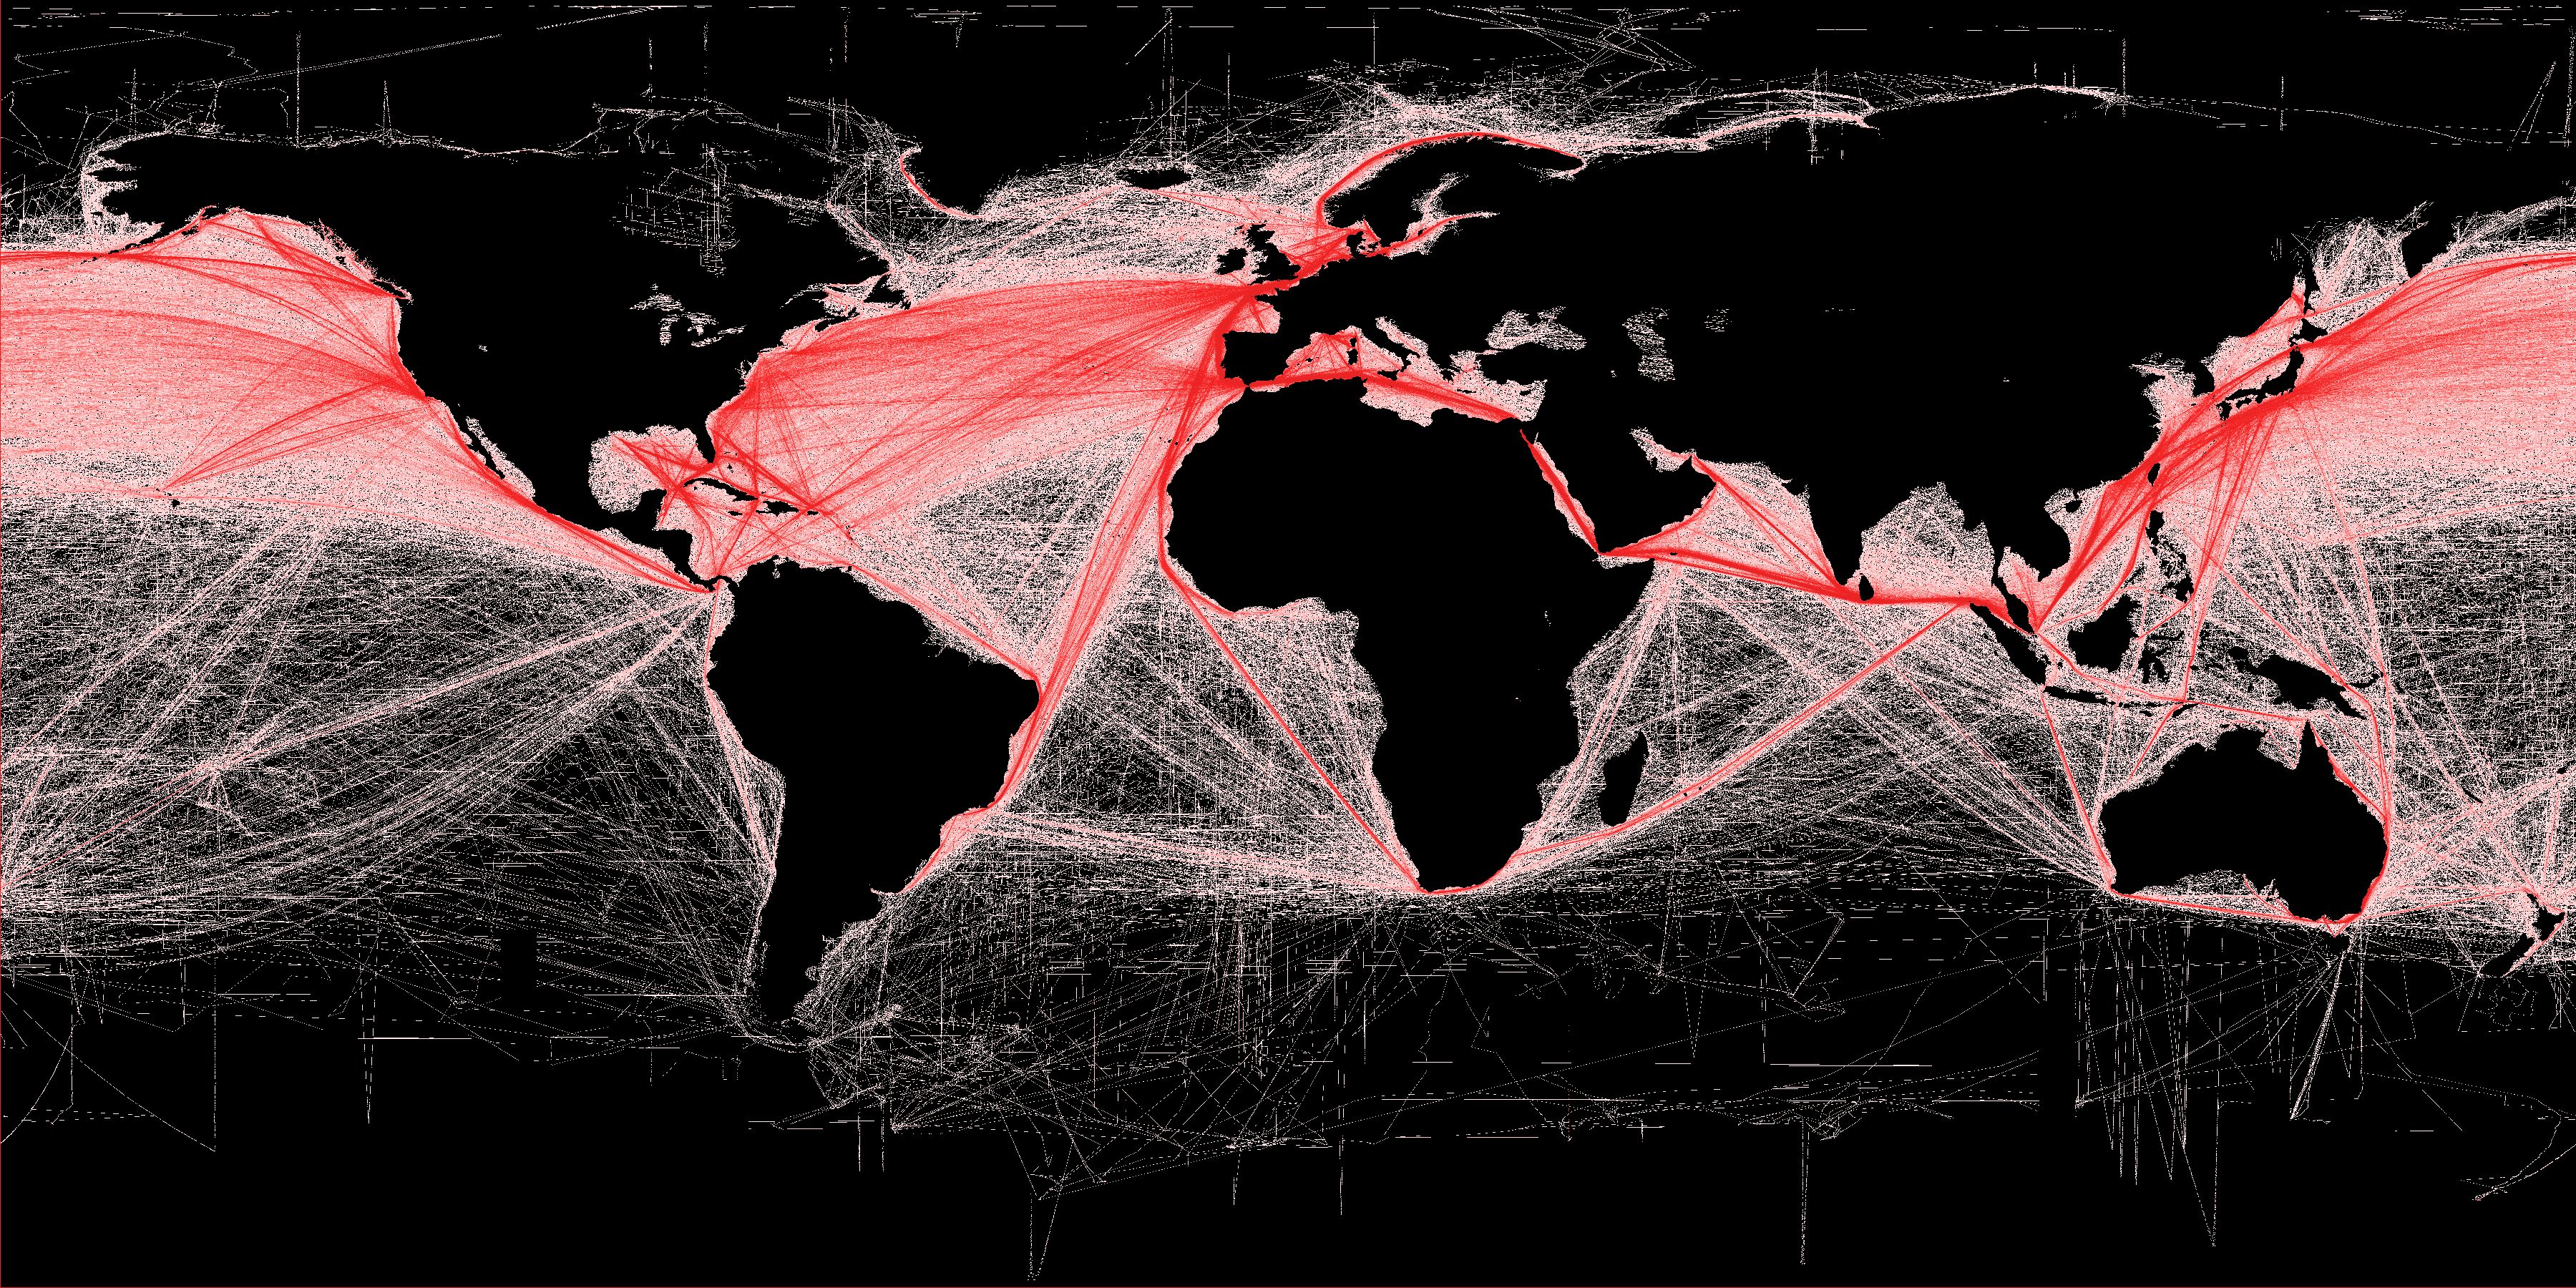 Global Shipping Routes Crisscross The 36314 